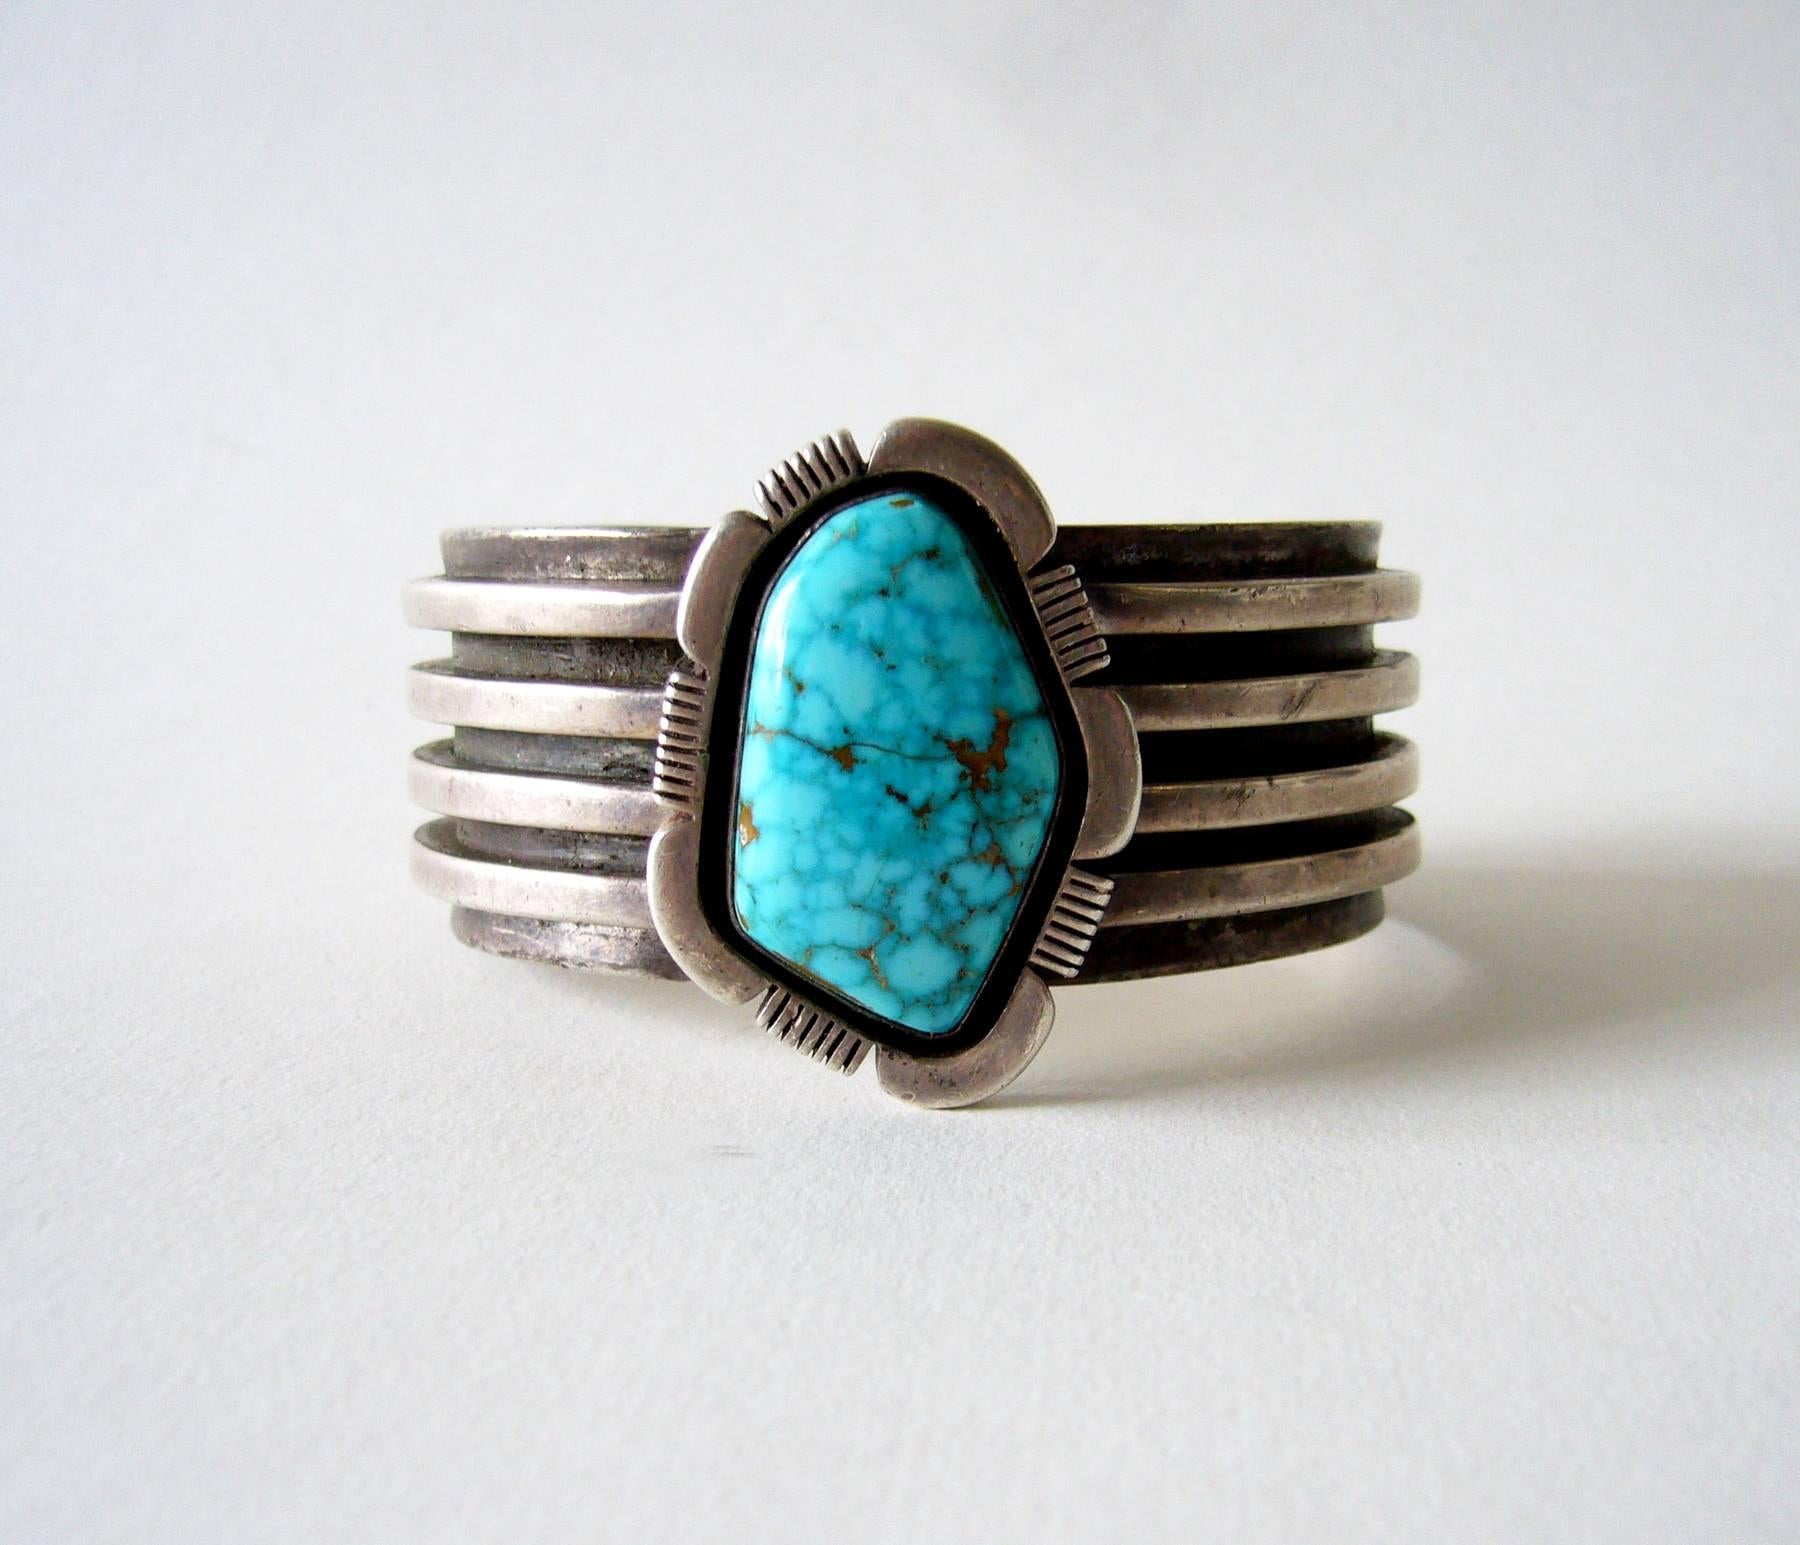 Kingman Turquoise Navajo bracelet, circa 1970's.   Bracelet is reminiscent of Kenneth Begay designs.  It has an inside circumference of 6.5